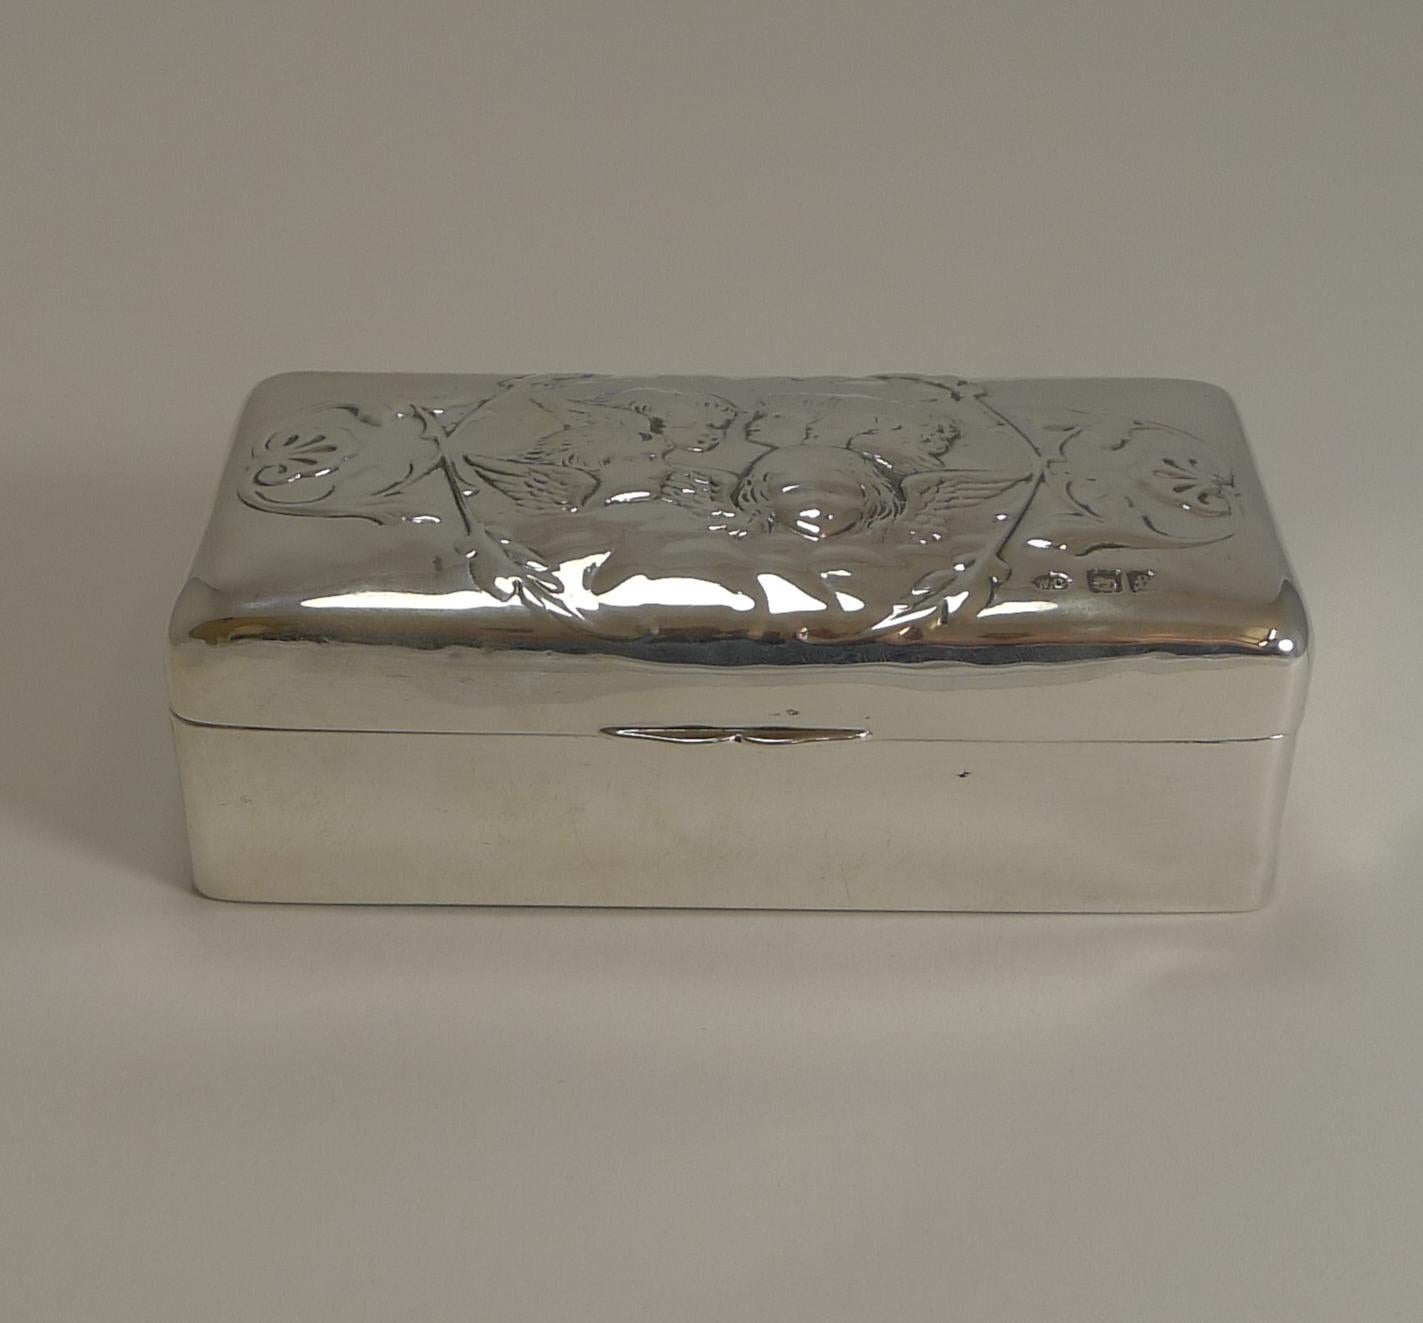 A wonderful solid box made from English sterling silver featuring the famous five winged Cherubs to the lid.

The hinged lid fits well and once opened, reveals a navy blue velvet and silk lining.

The box is fully hallmarked for London 1901